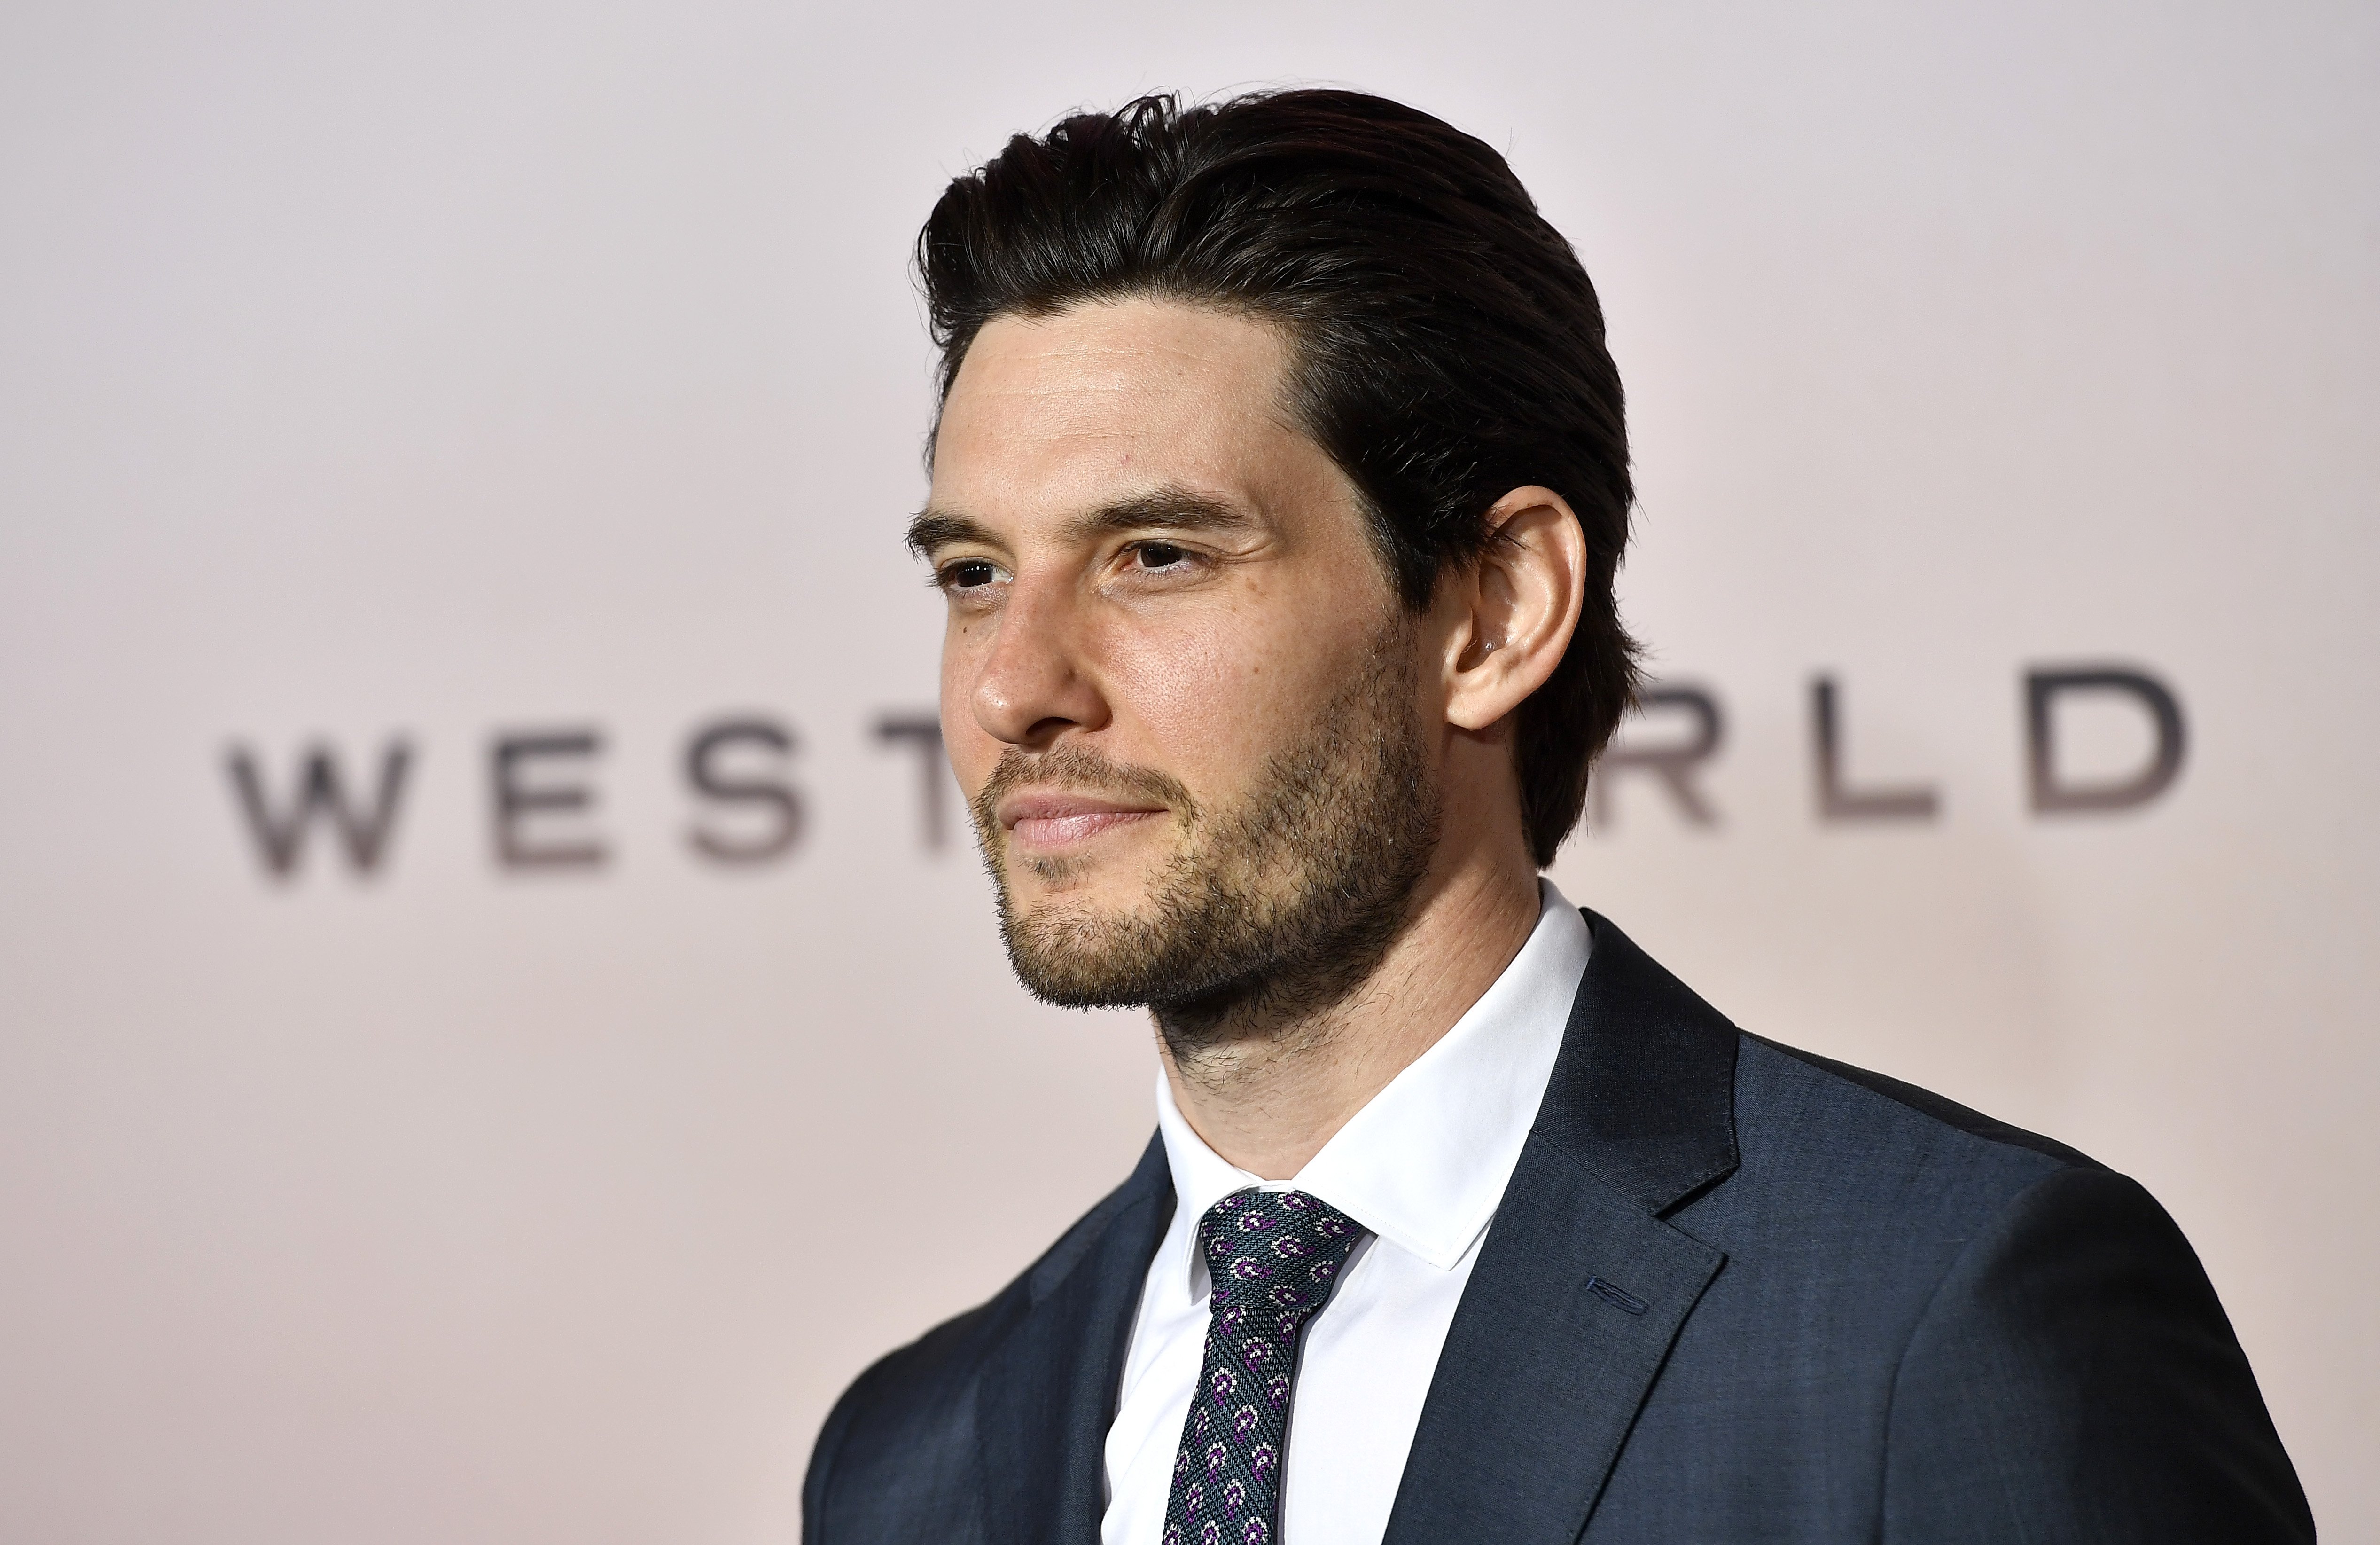 Ben Barnes poses at the Premiere Of HBO's "Westworld" Season 3 in Hollywood | Source: Getty Images